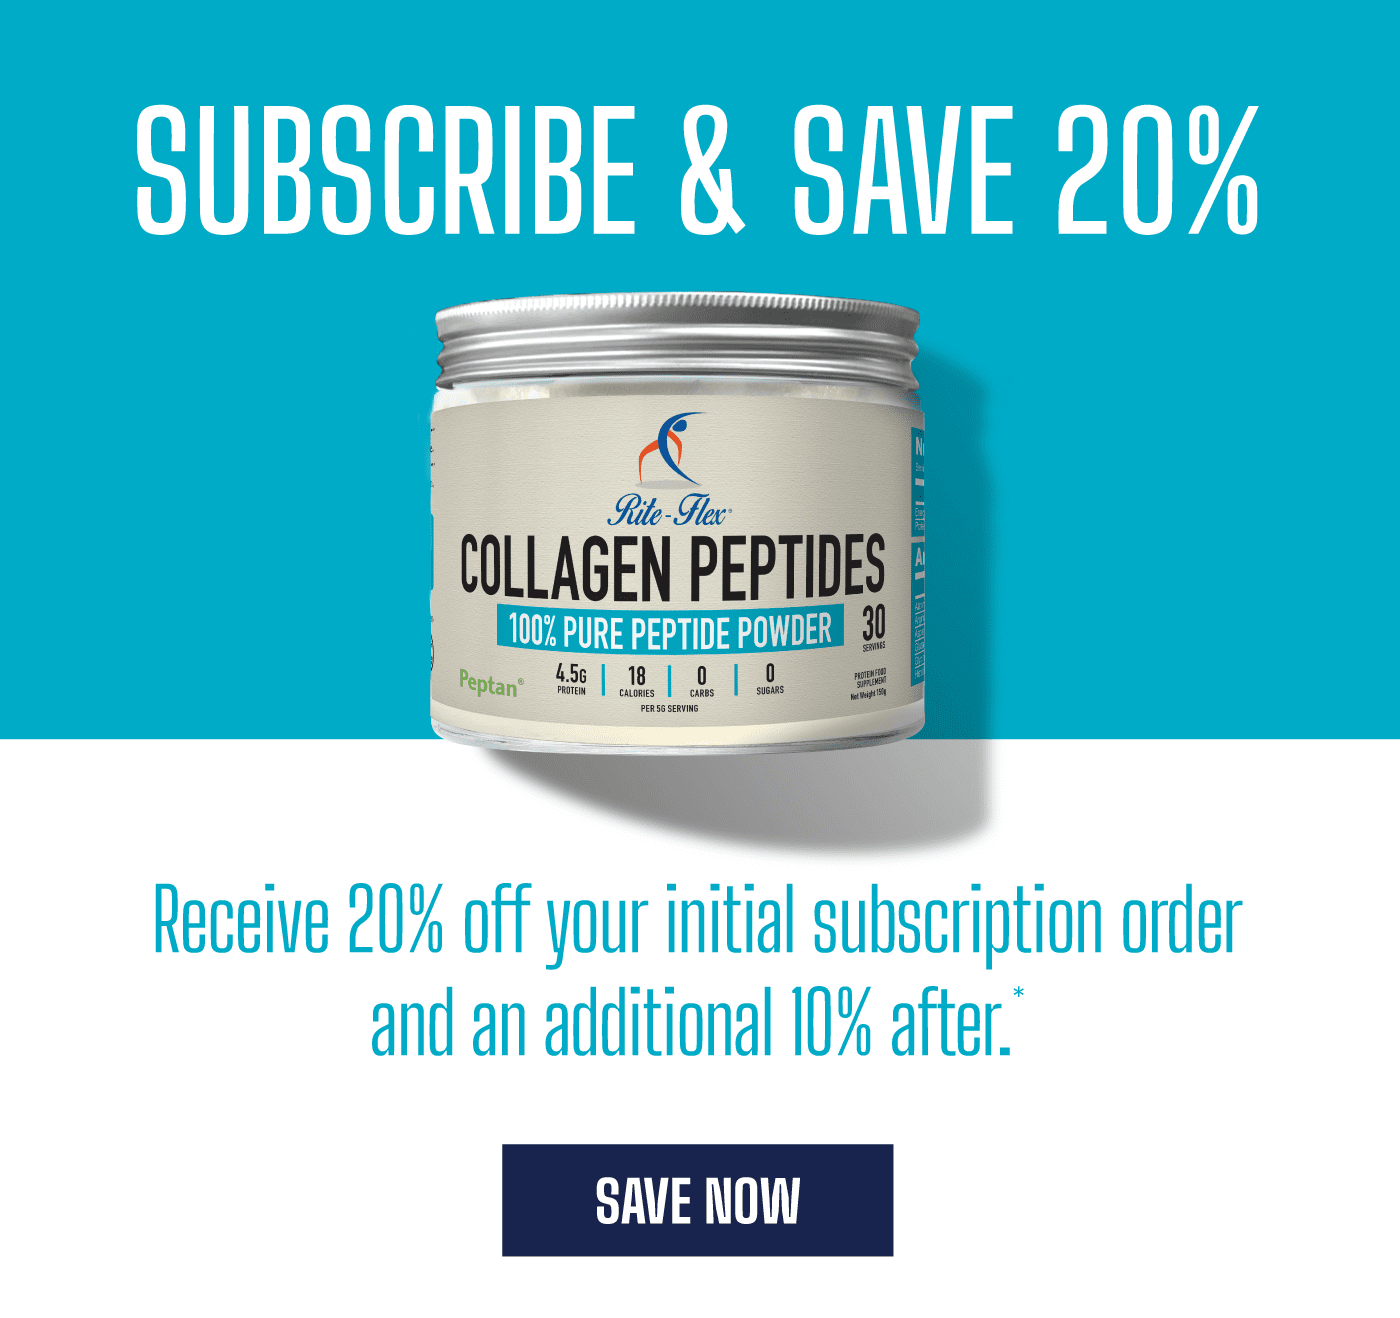 subscribe and save 20% on your initial subscription order of collagen powder